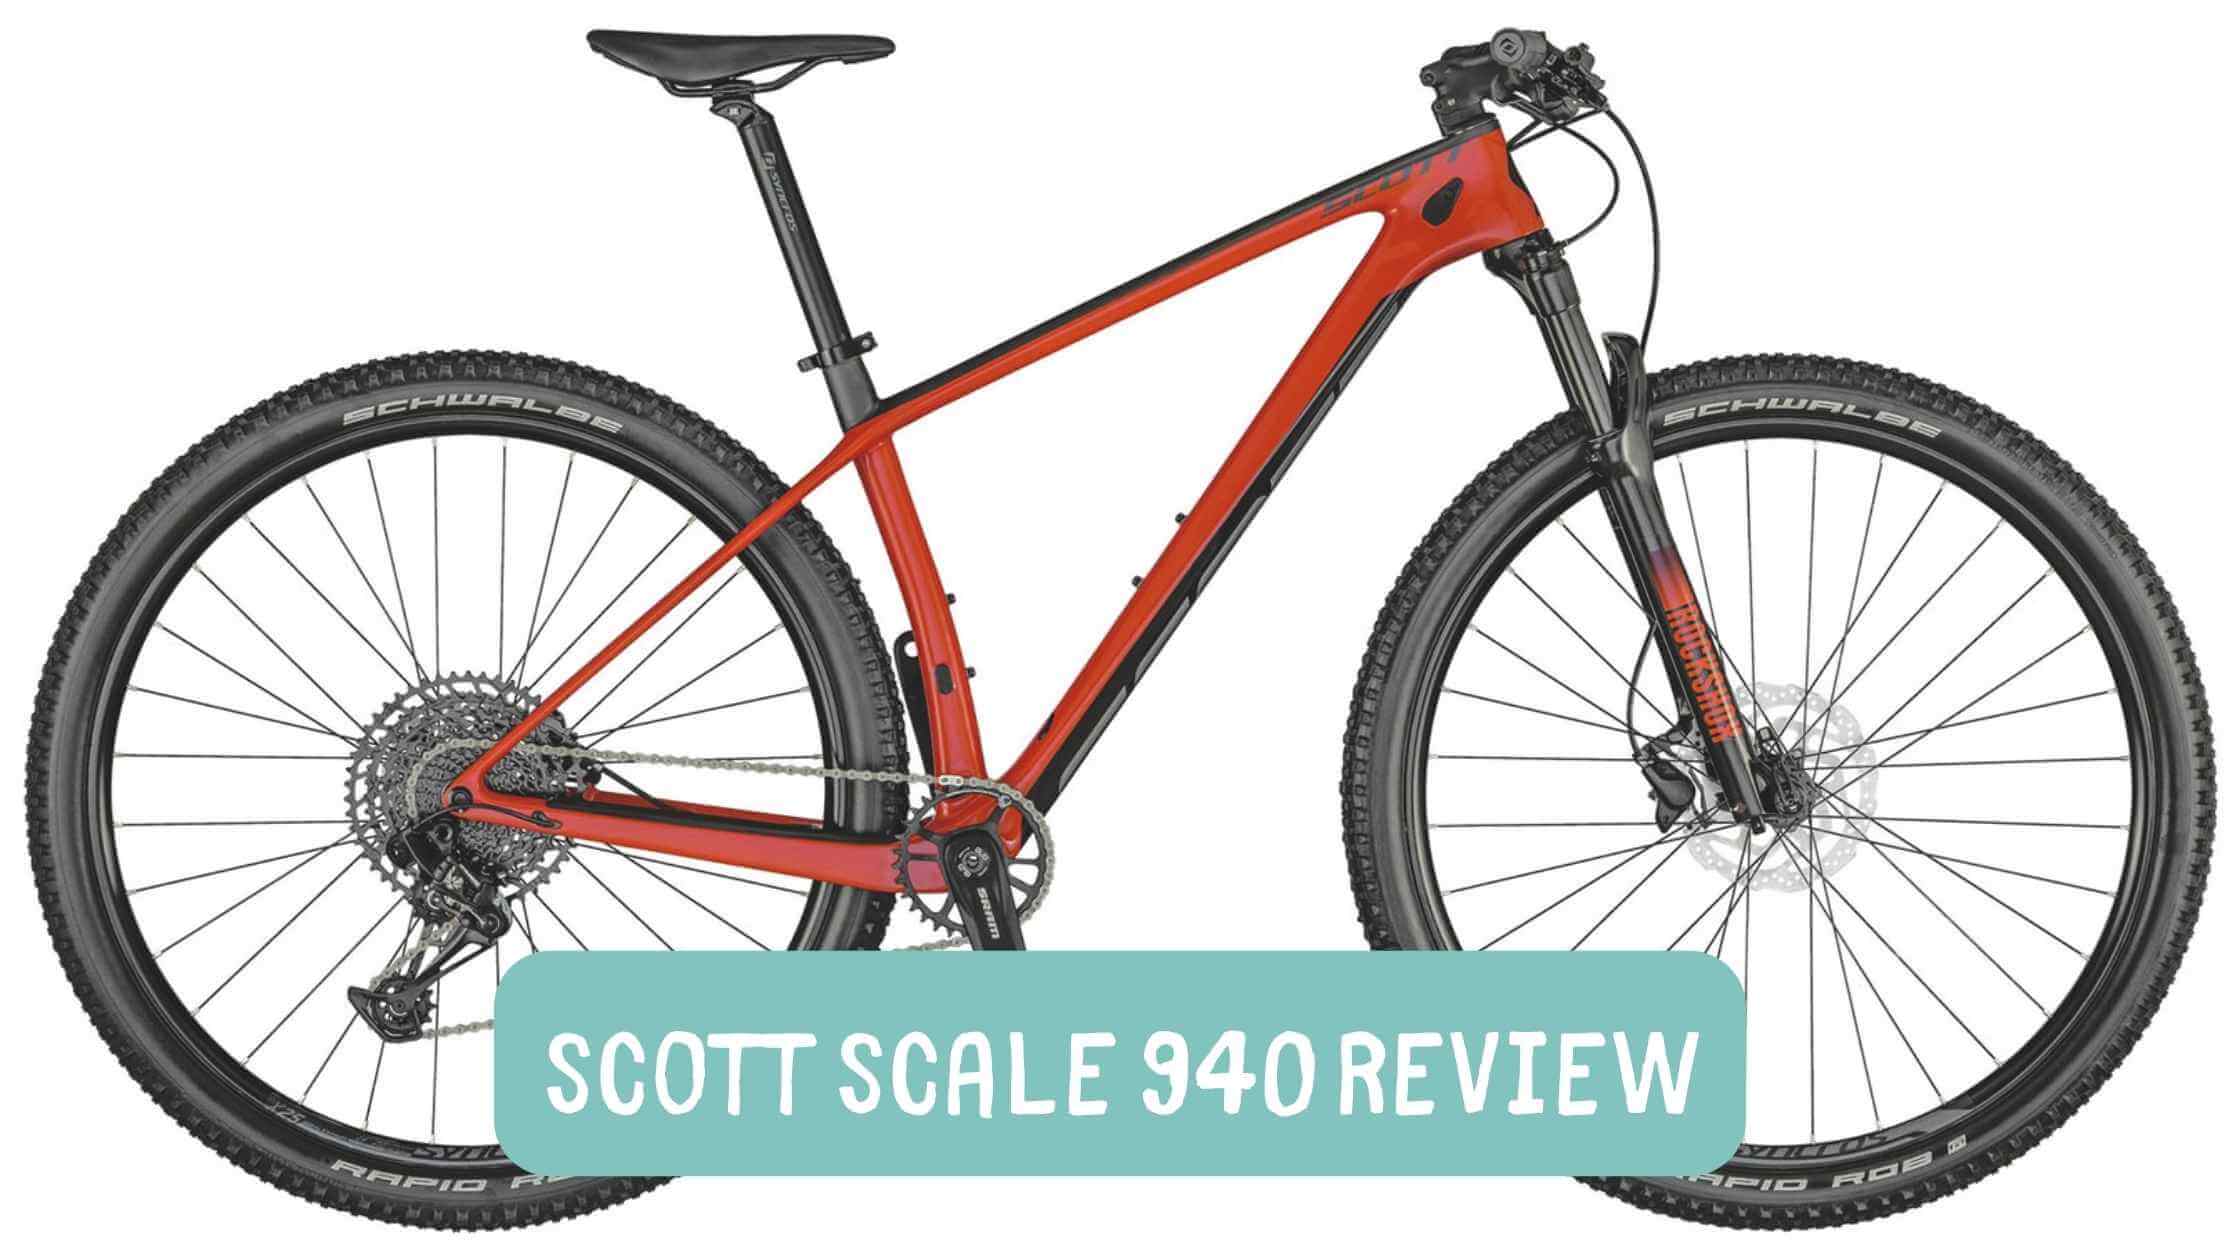 Scott Scale 940 Review